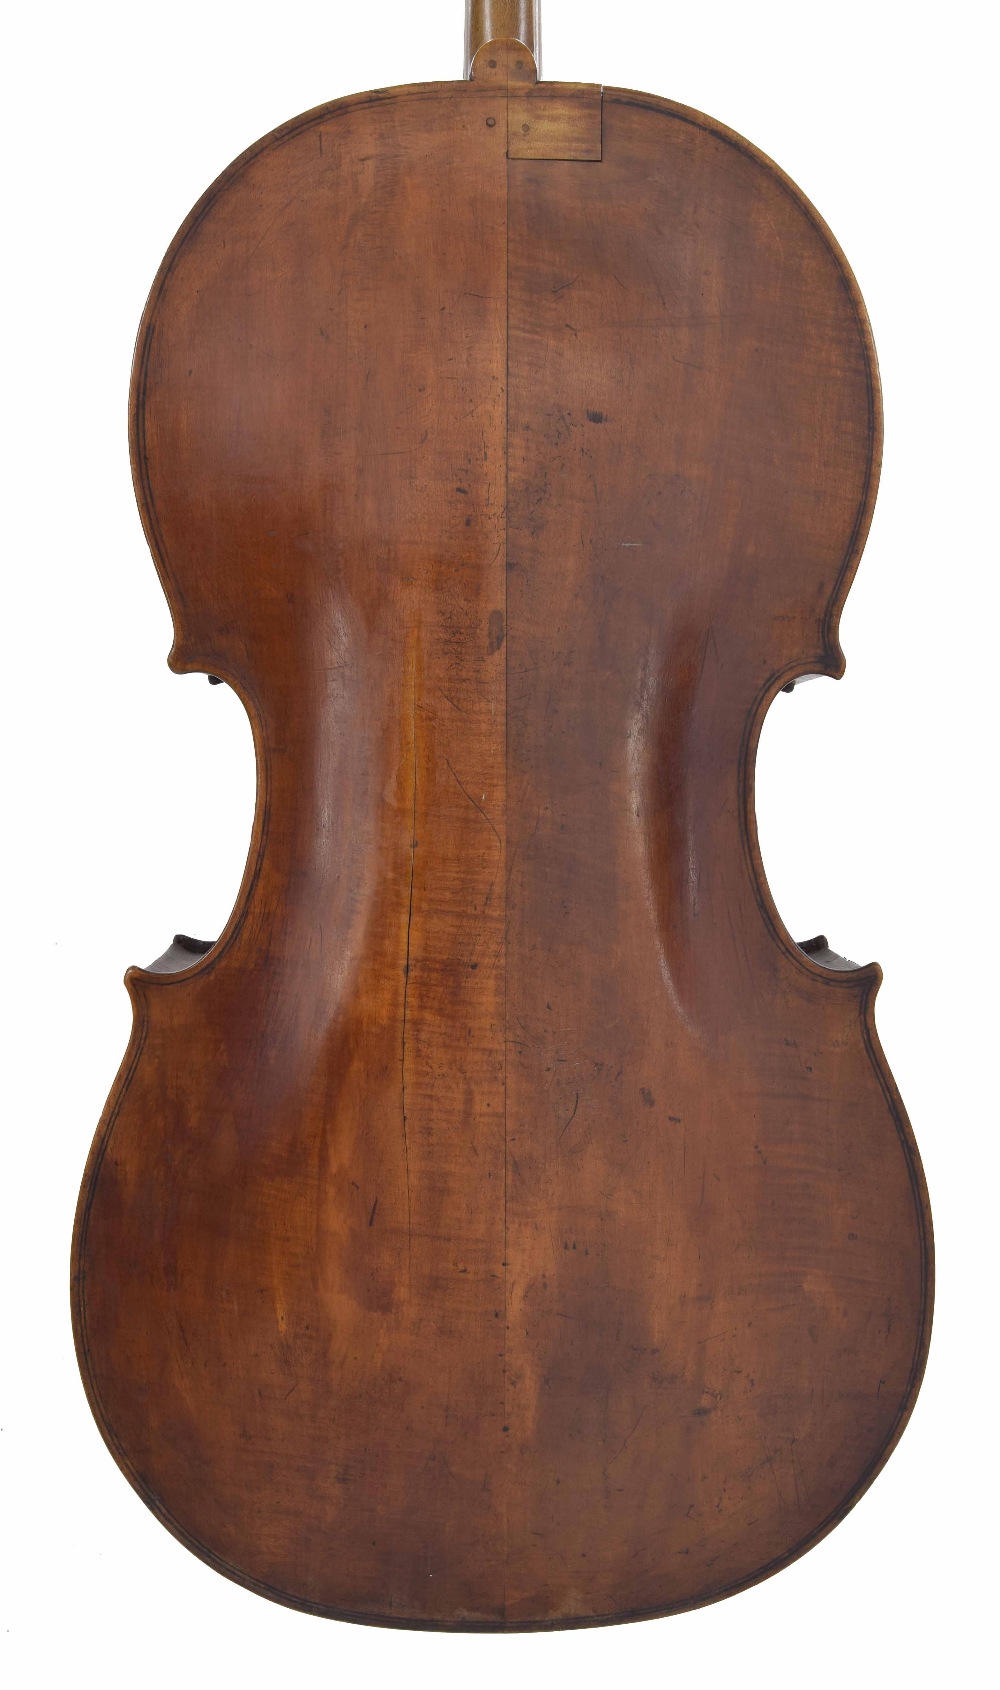 Old English violoncello circa 1890, in need of restoration, 29 1/2", 74.90cm - Image 2 of 3